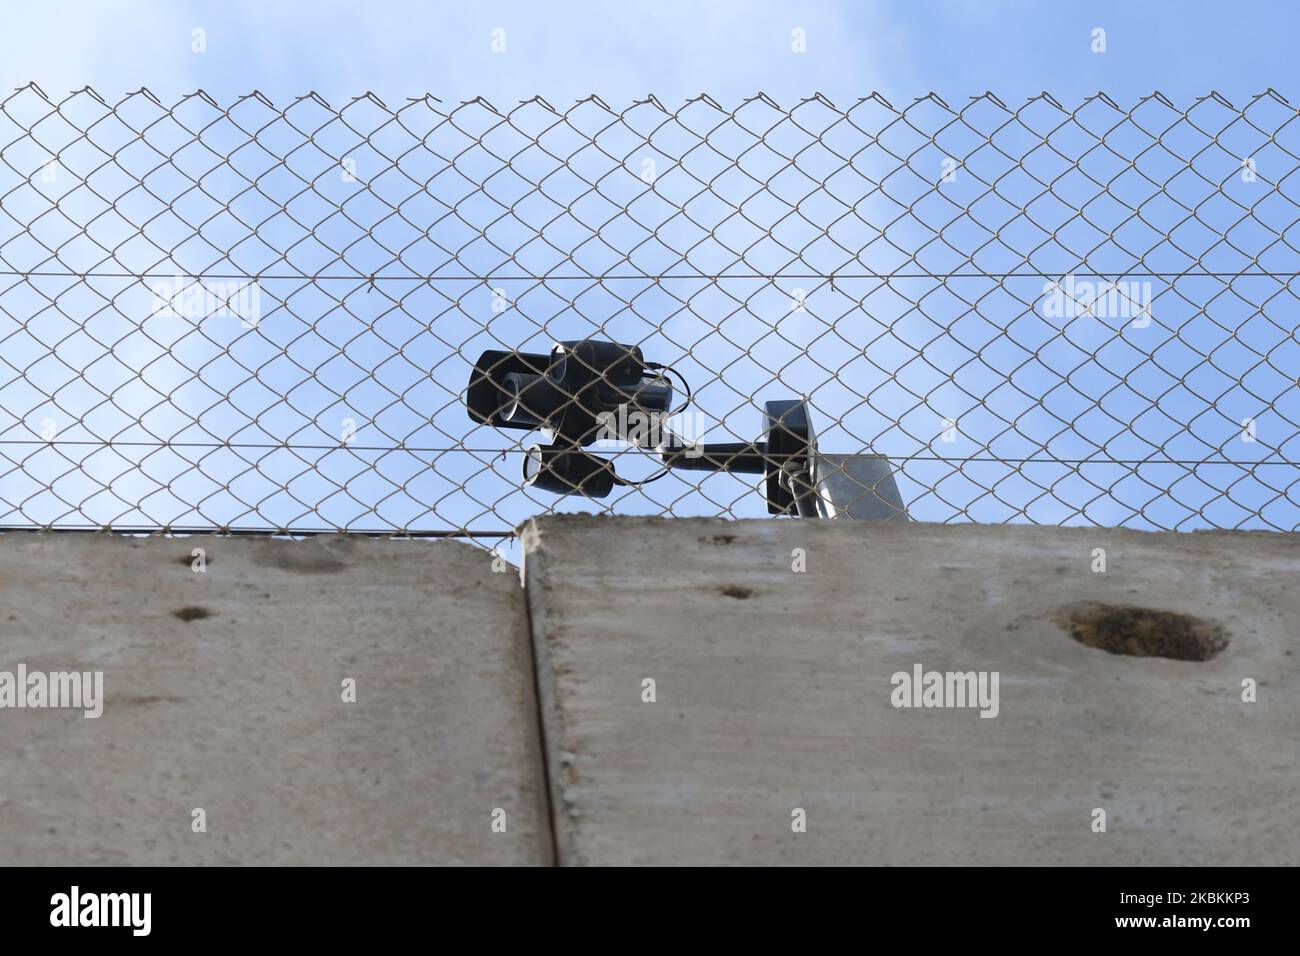 A CCTV camera over the wall separting Israel and the West Bank in Bethlehem. On Thursday, March 5, 2020, in Bethlehem, Palestine (Photo by Artur Widak/NurPhoto) Stock Photo